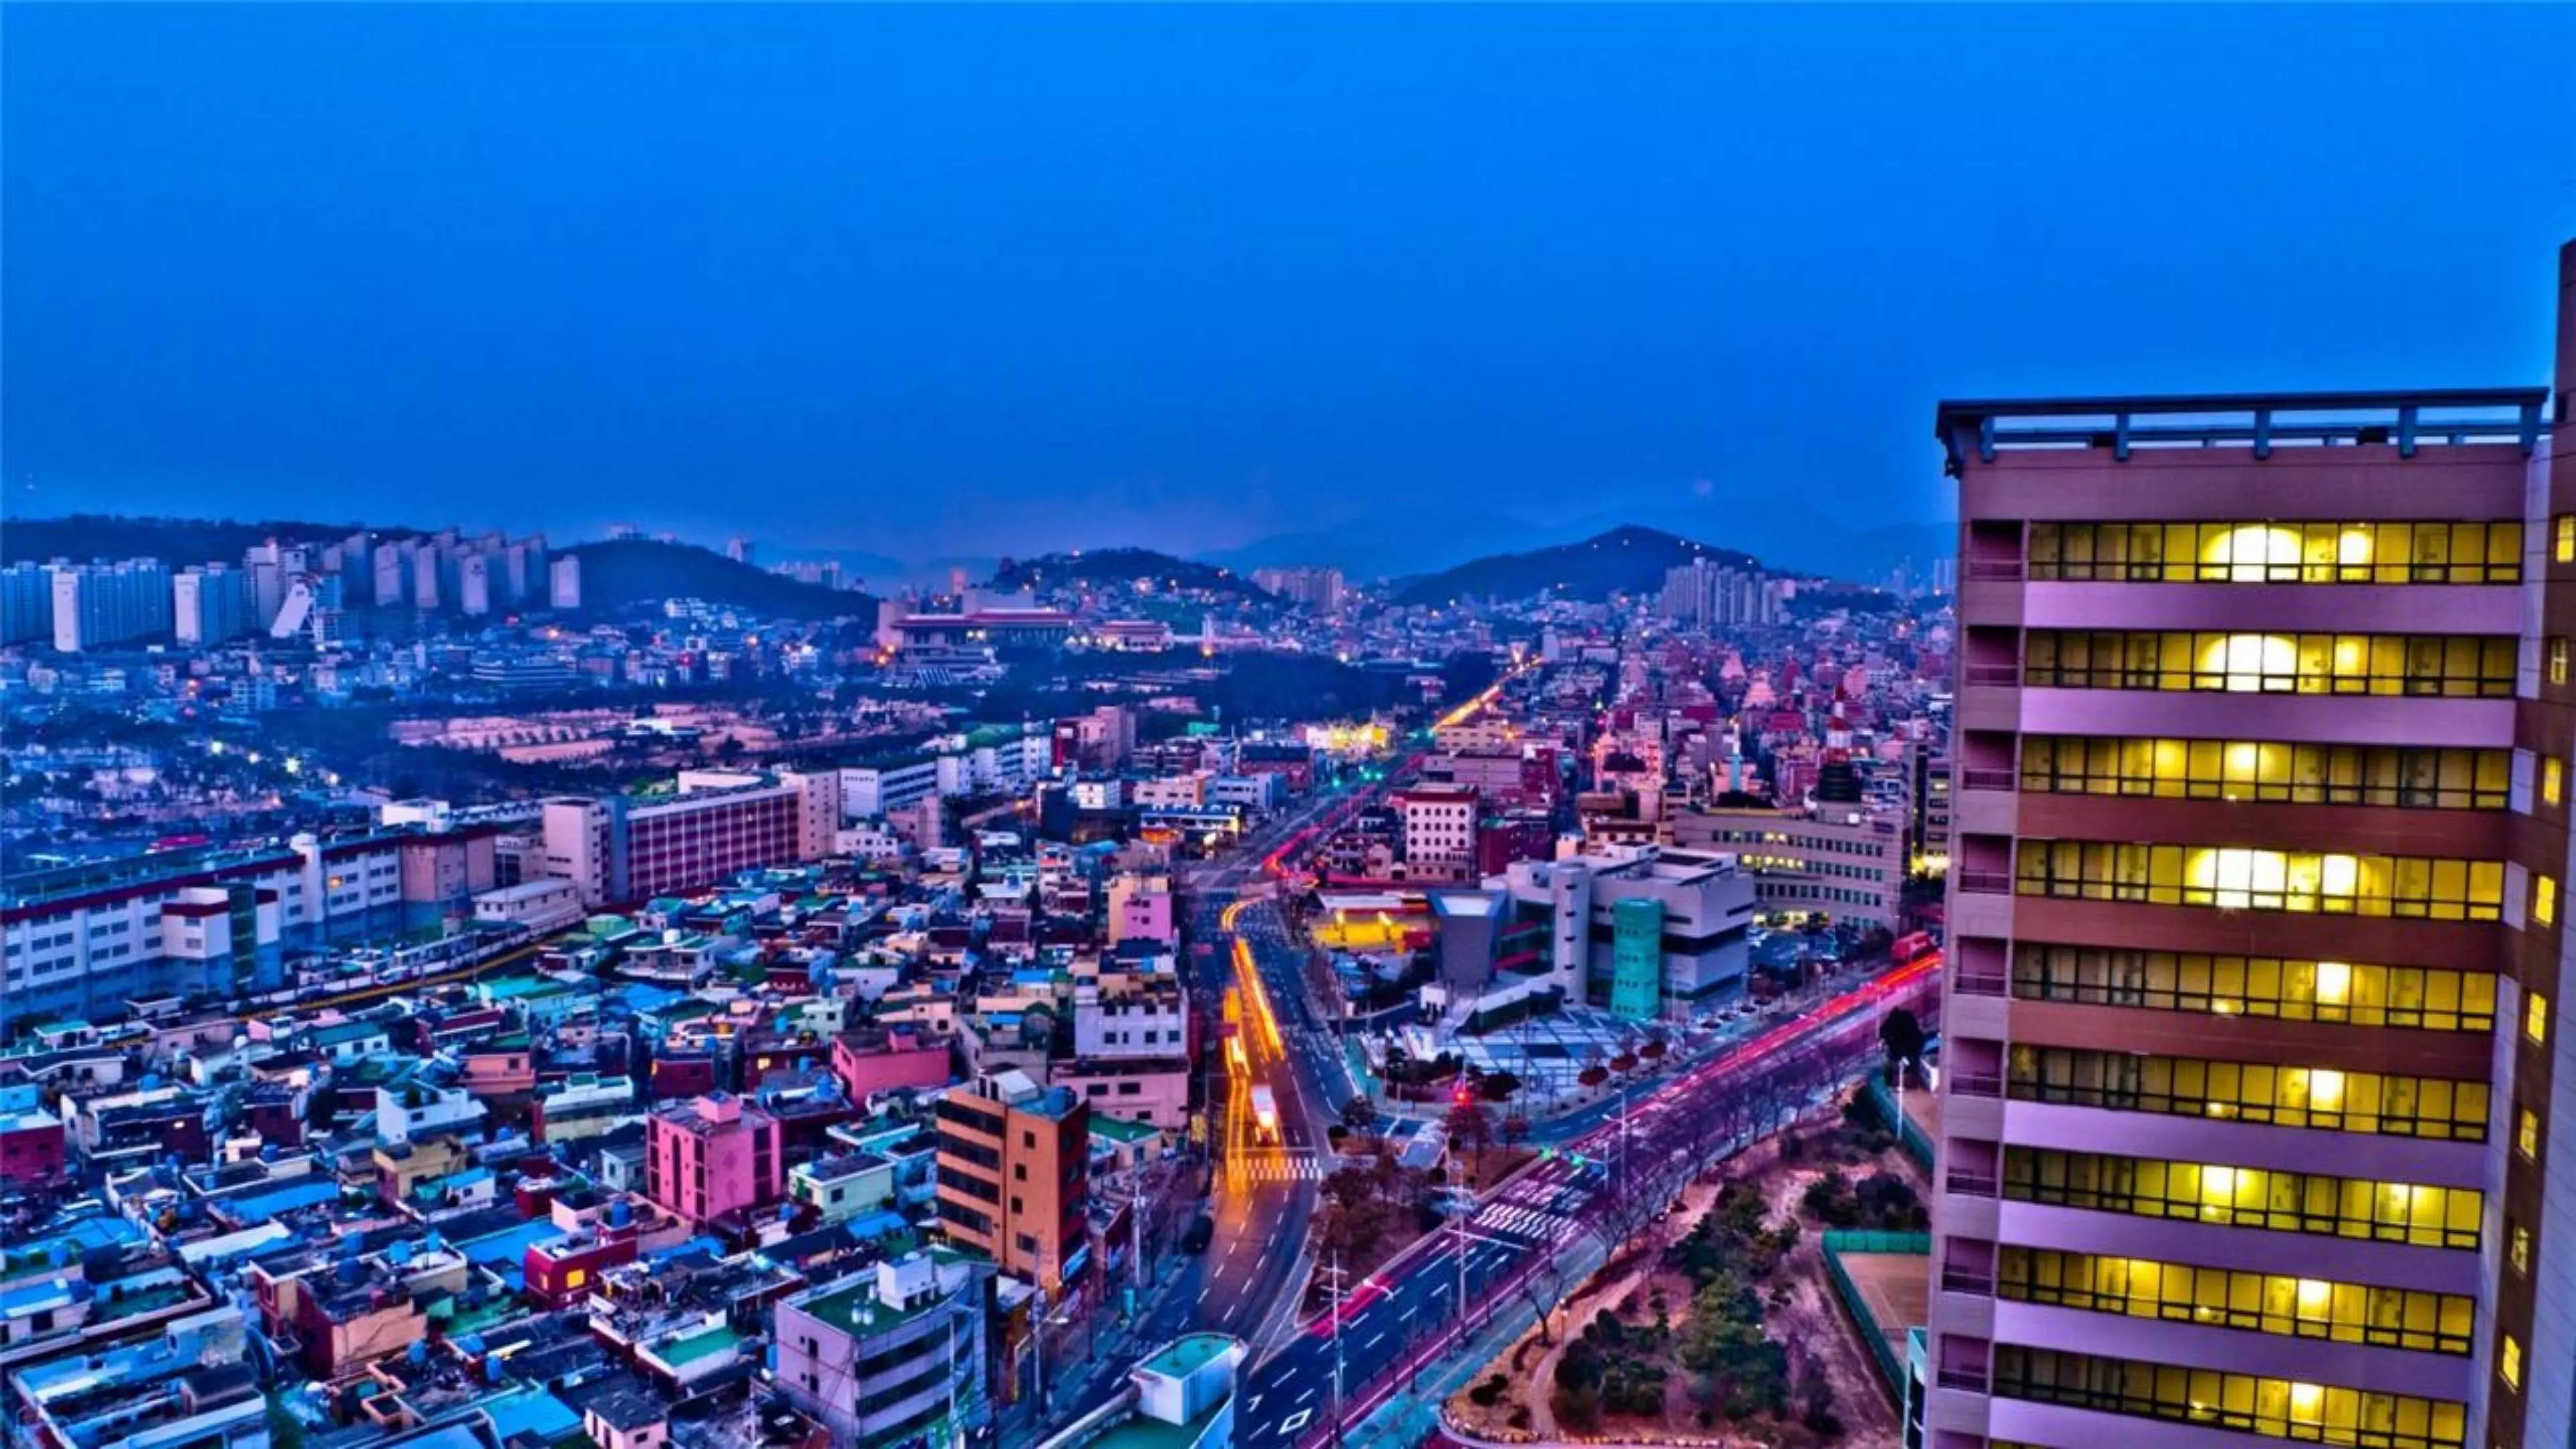 A city at night with many buildings - Seoul